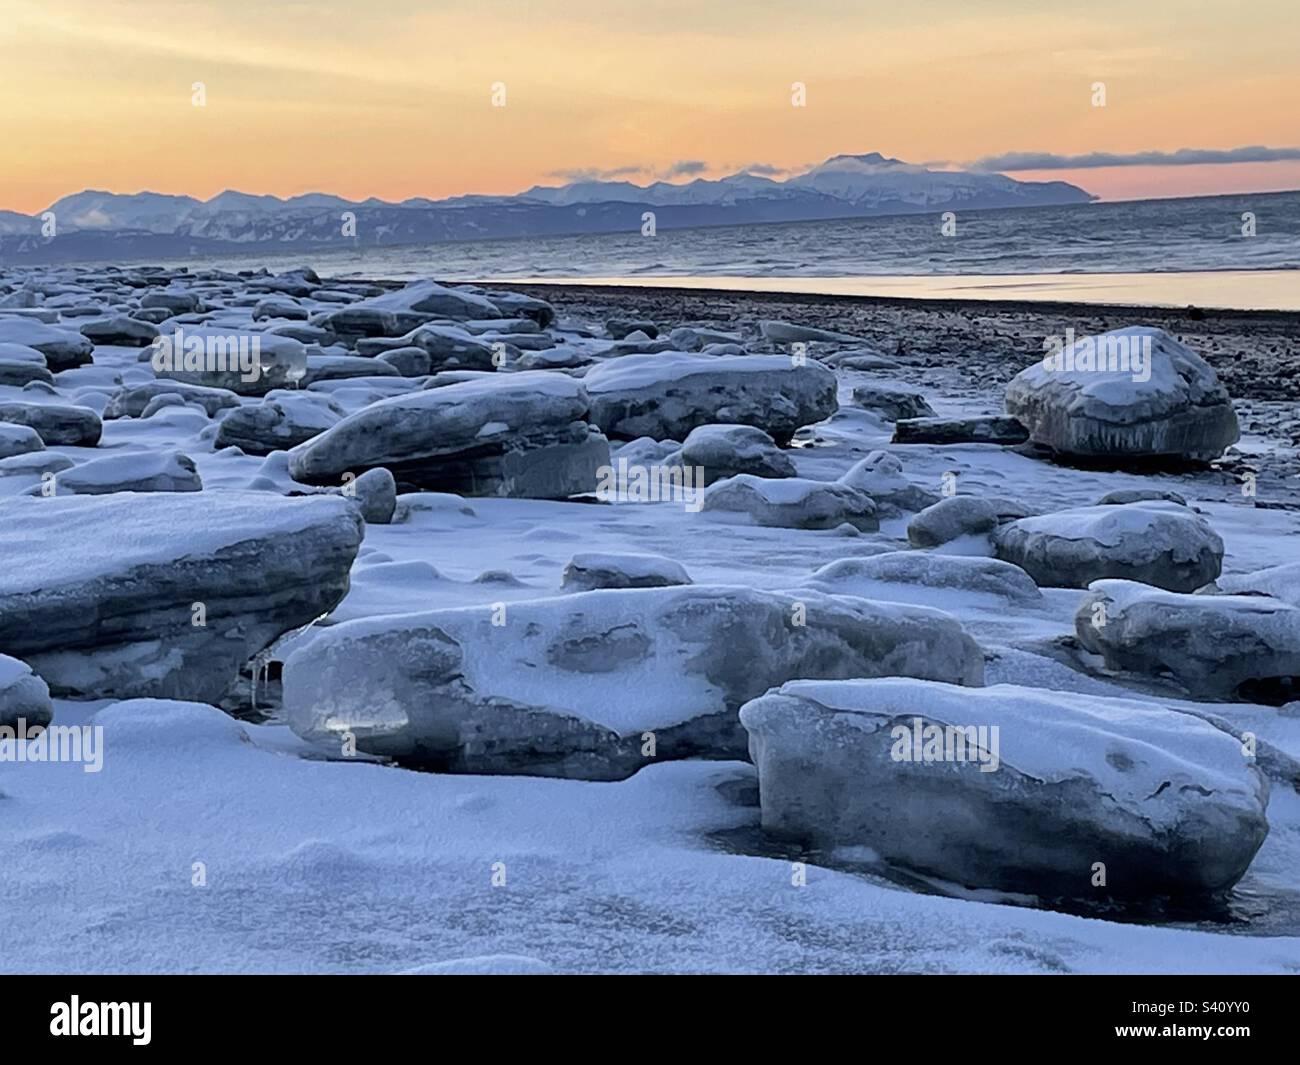 Ice blocks beached by tide, winter, Cook Inlet, Alaska Stock Photo